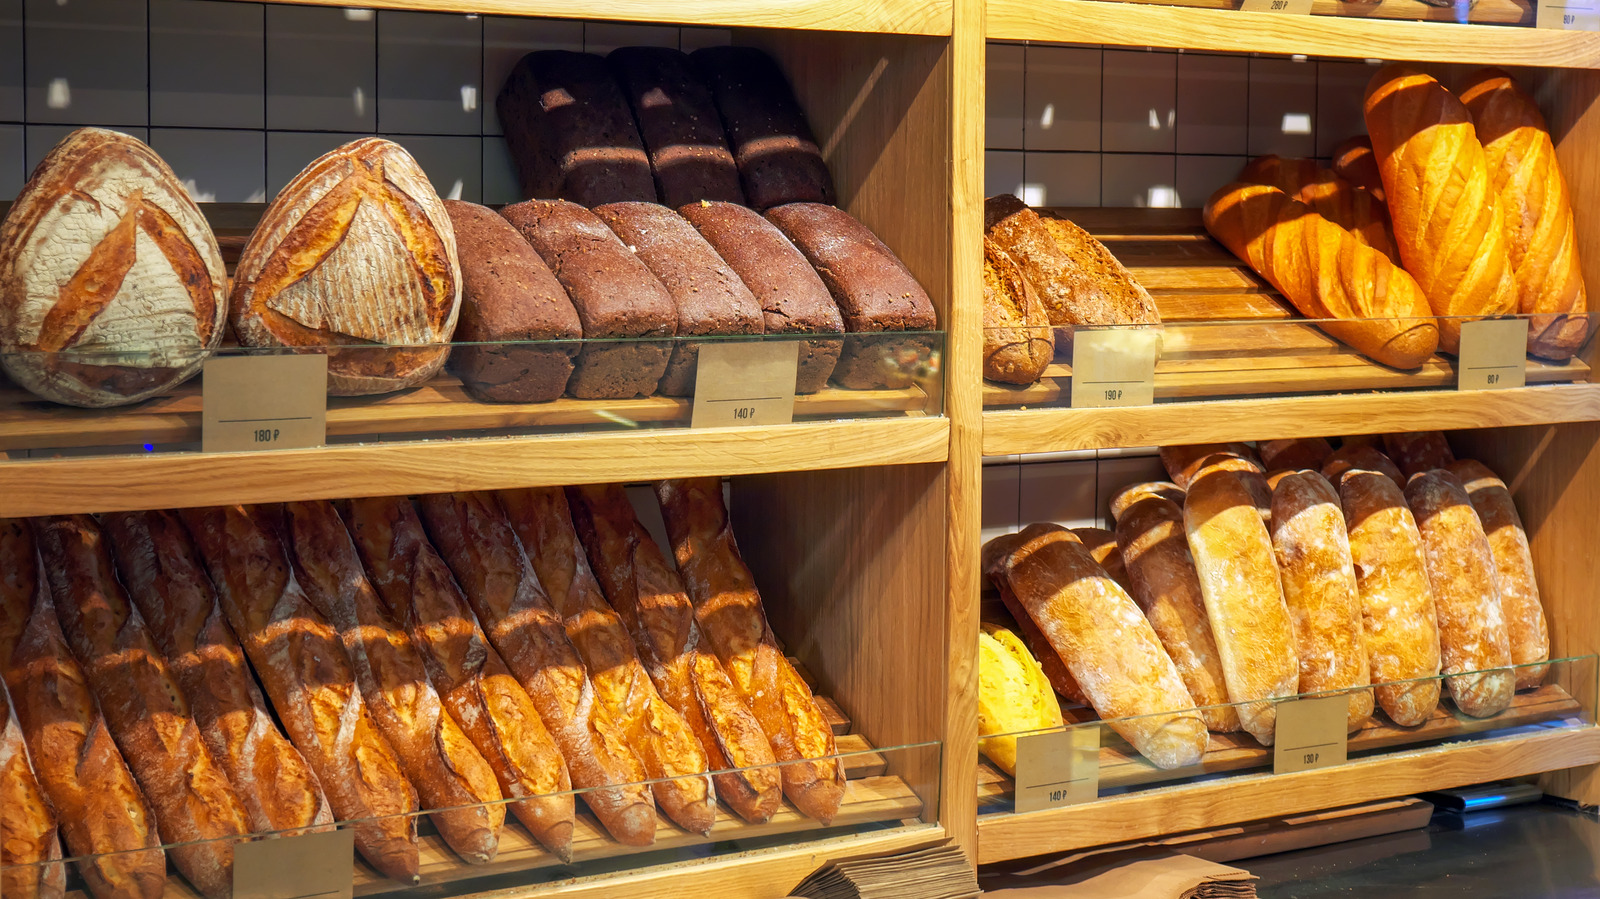 8 Surprising Things the Grocery Store Bakery Can Do for You